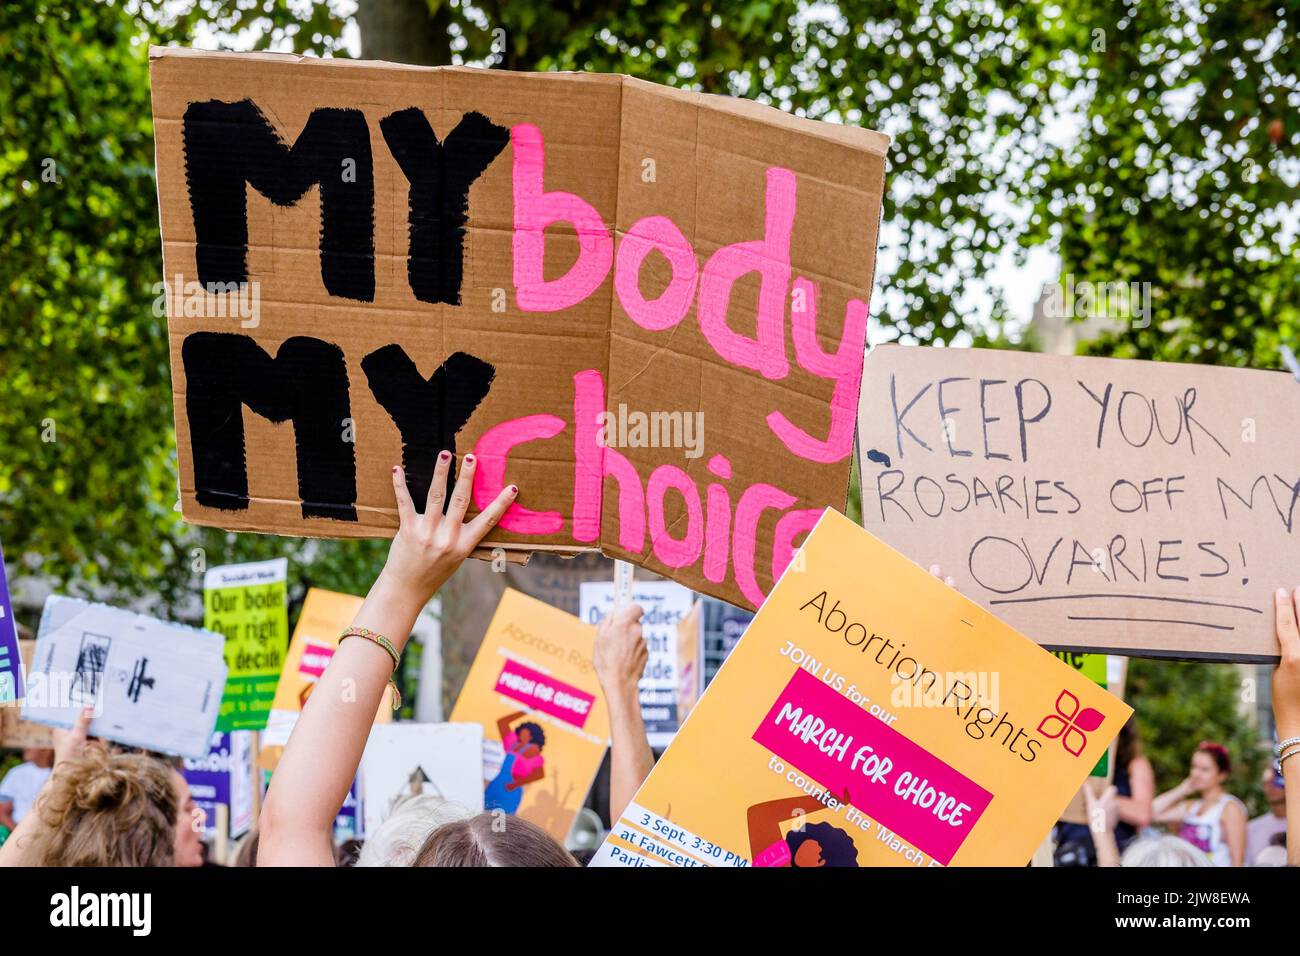 London, UK. 3 September 2022.  Pro-choice abortion campaigners display messaging of women's rights to choose during a March for Choice rally in Parliament Square in opposition to a rally also being held by anti-abortion campaign groups. Stock Photo